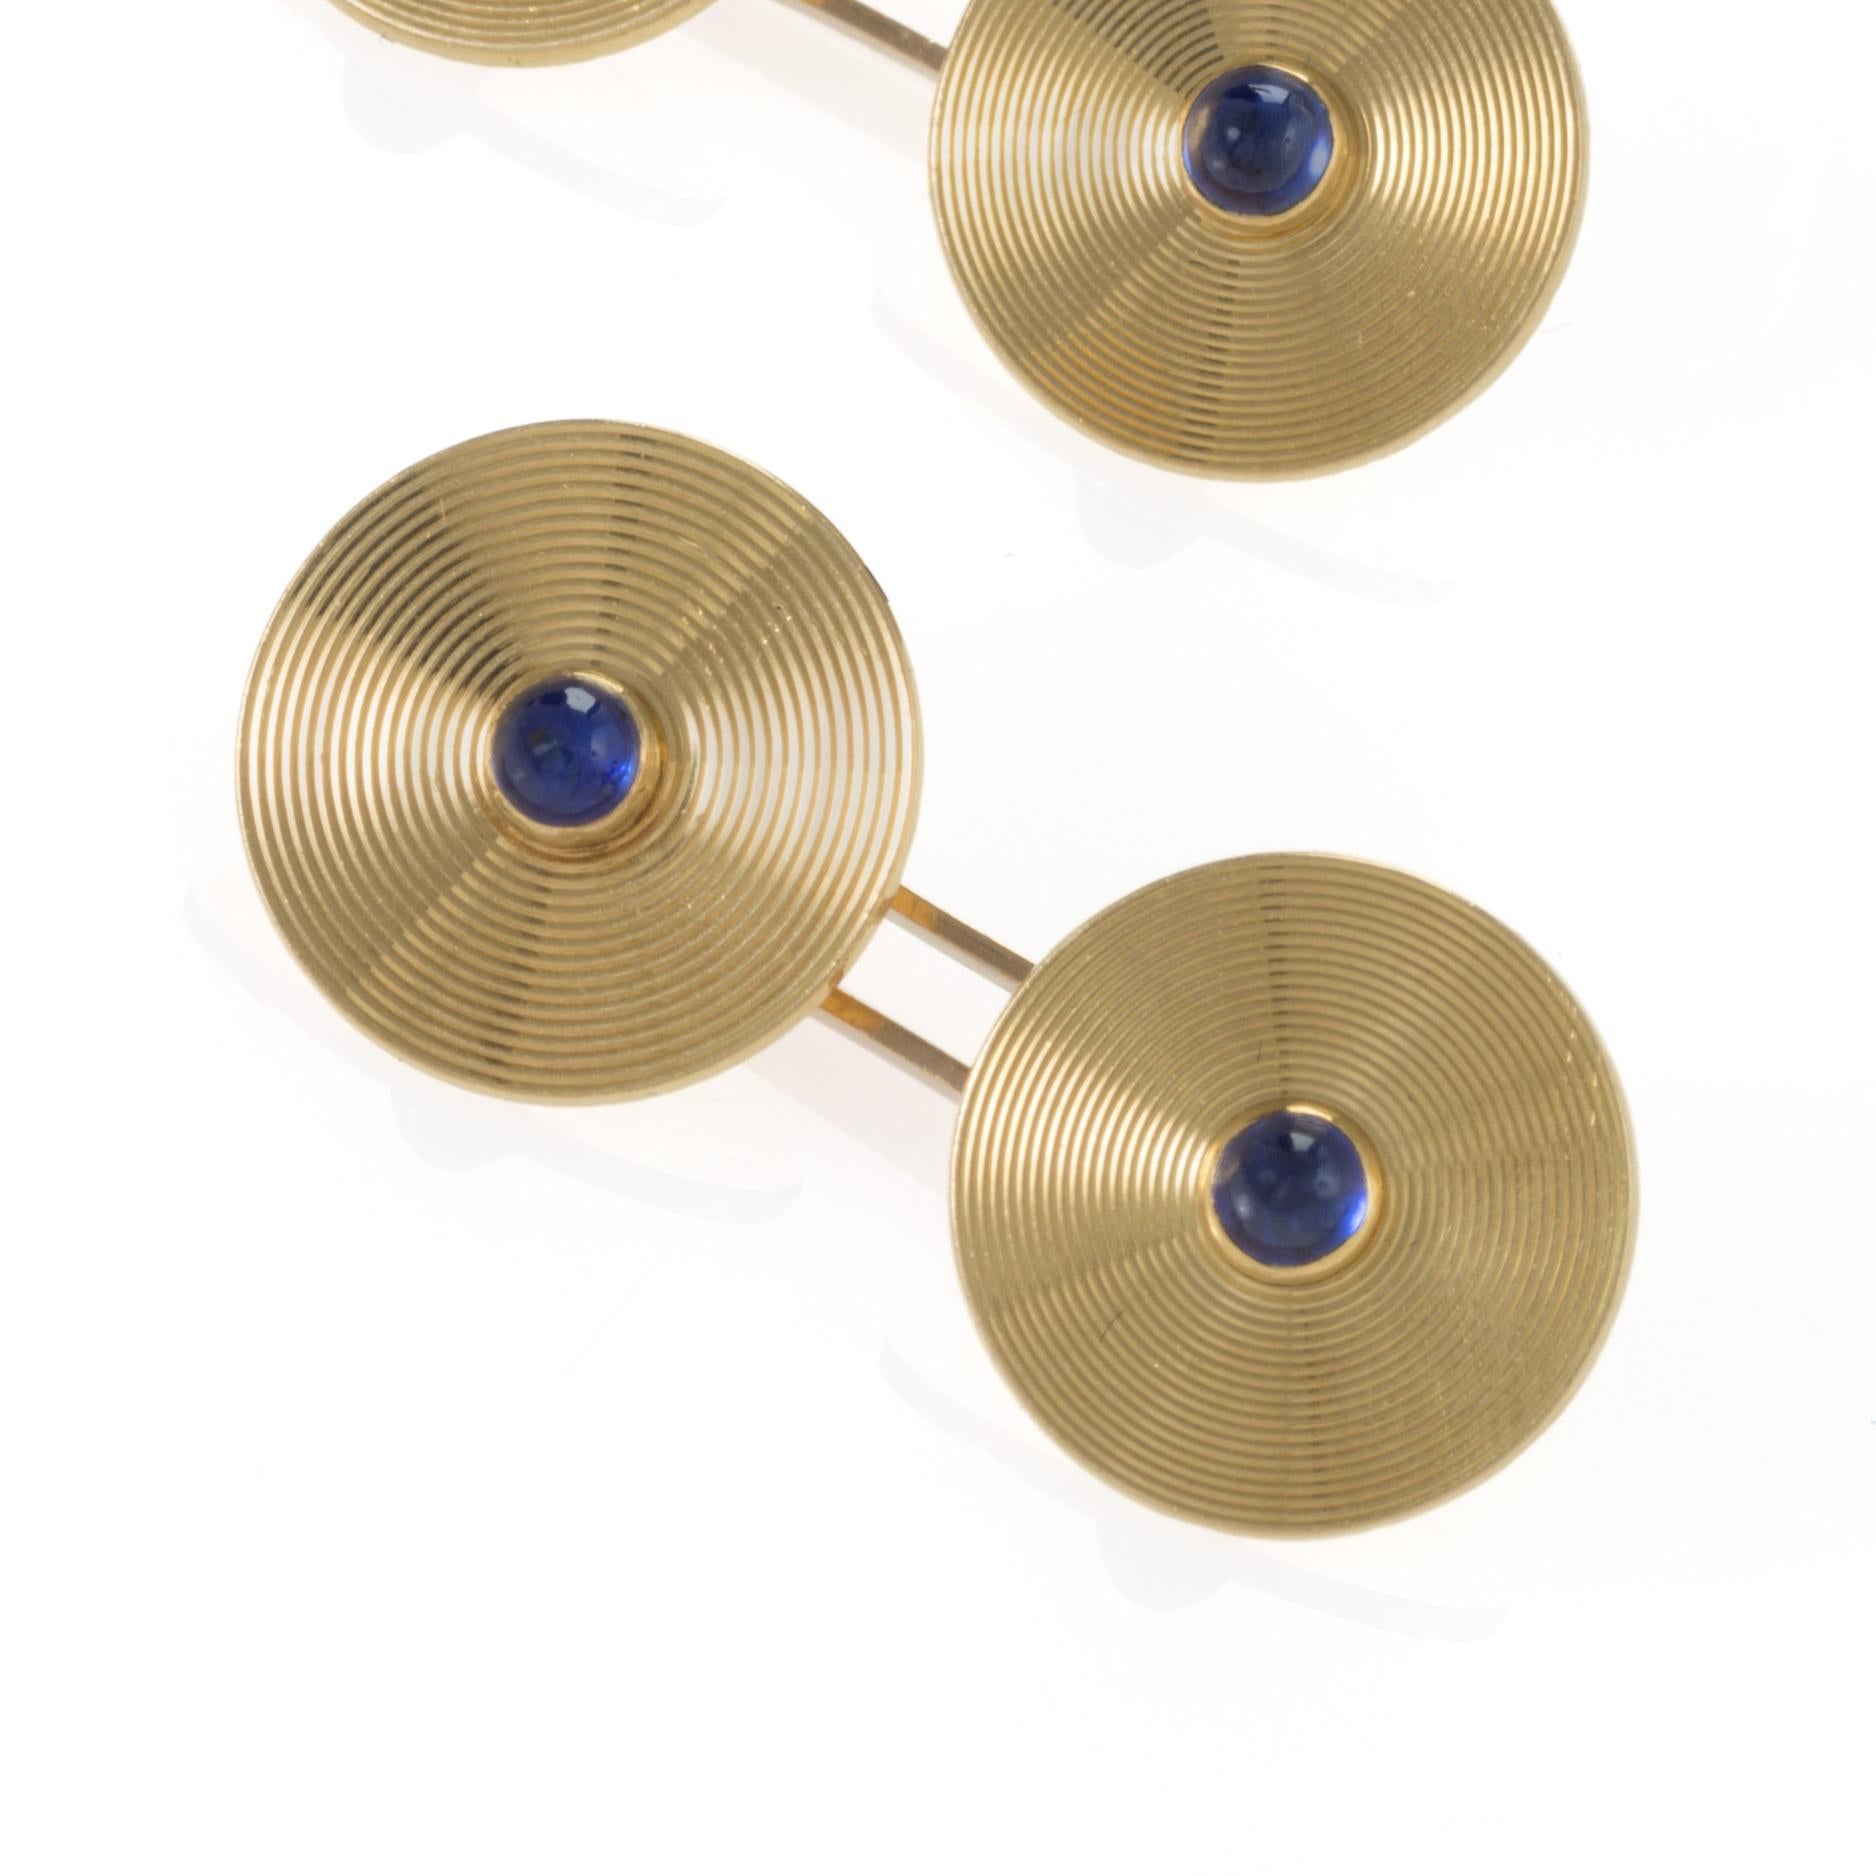 Cabochon Cartier Sapphire and Gold Cuff Links